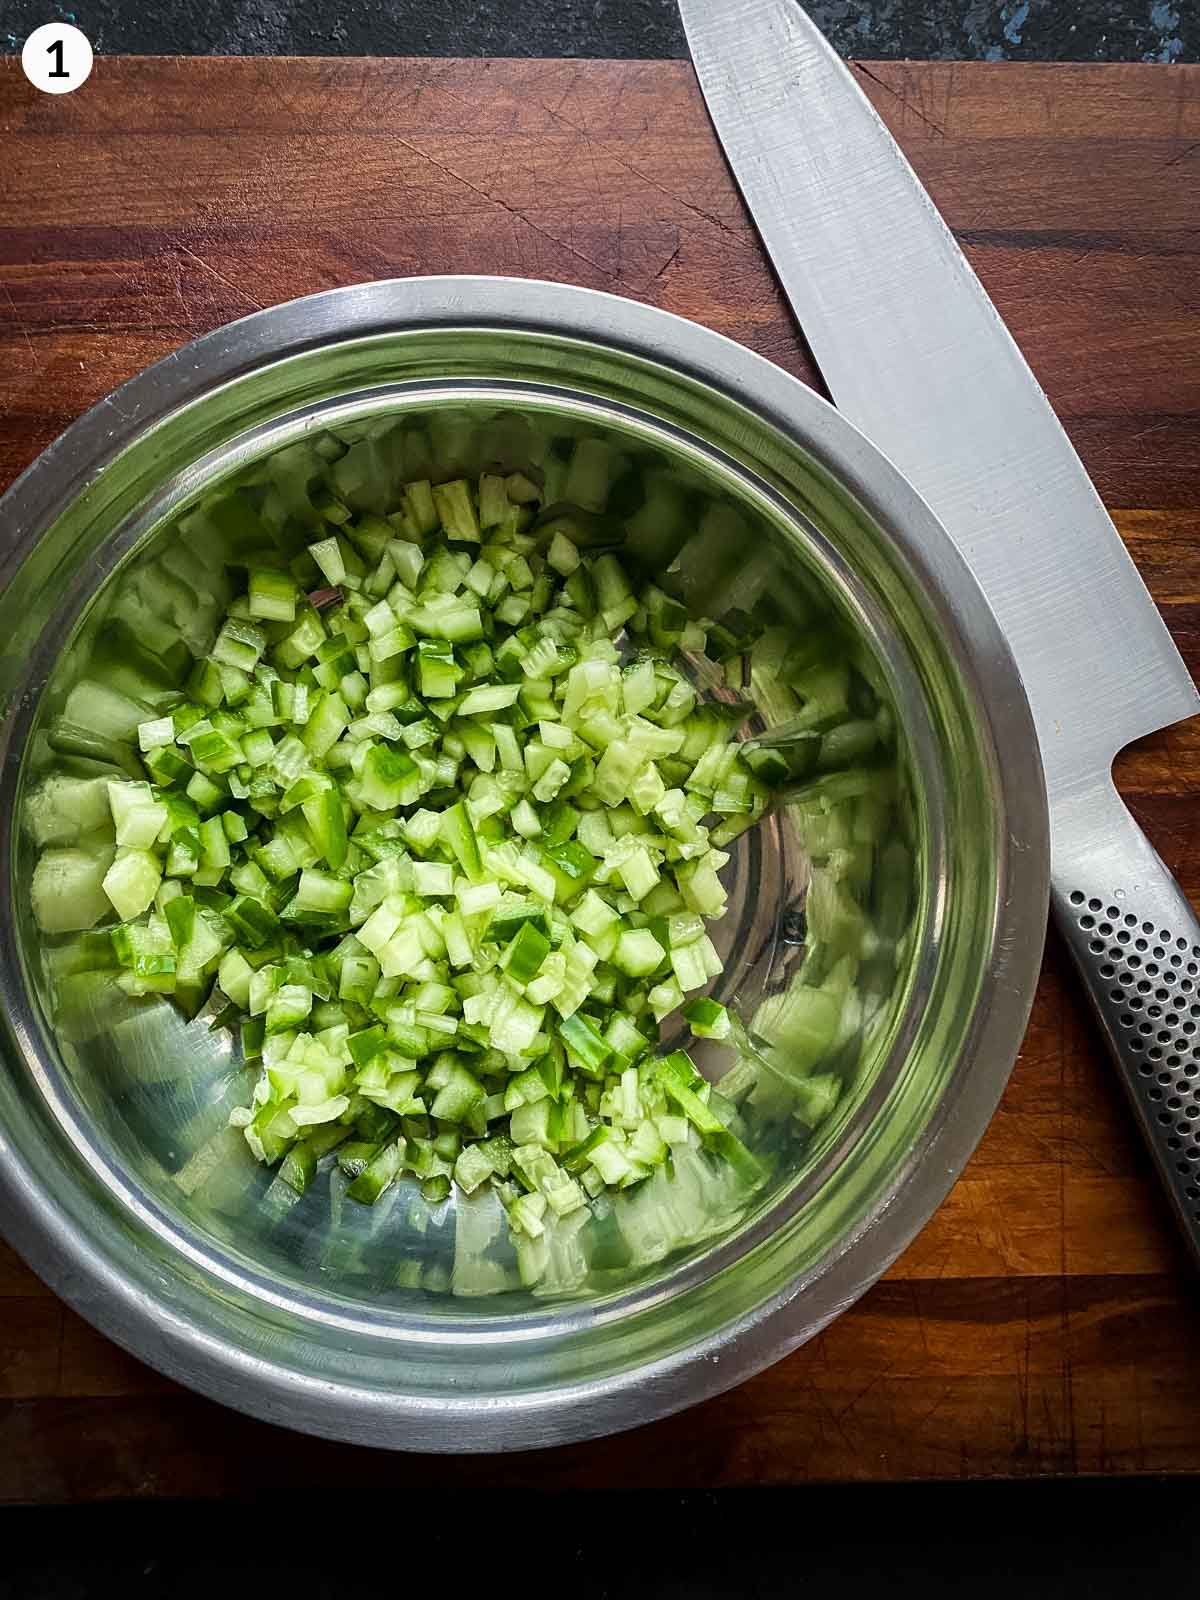 Diced cucumber in a prep bowl on a wooden board with a sharp knife